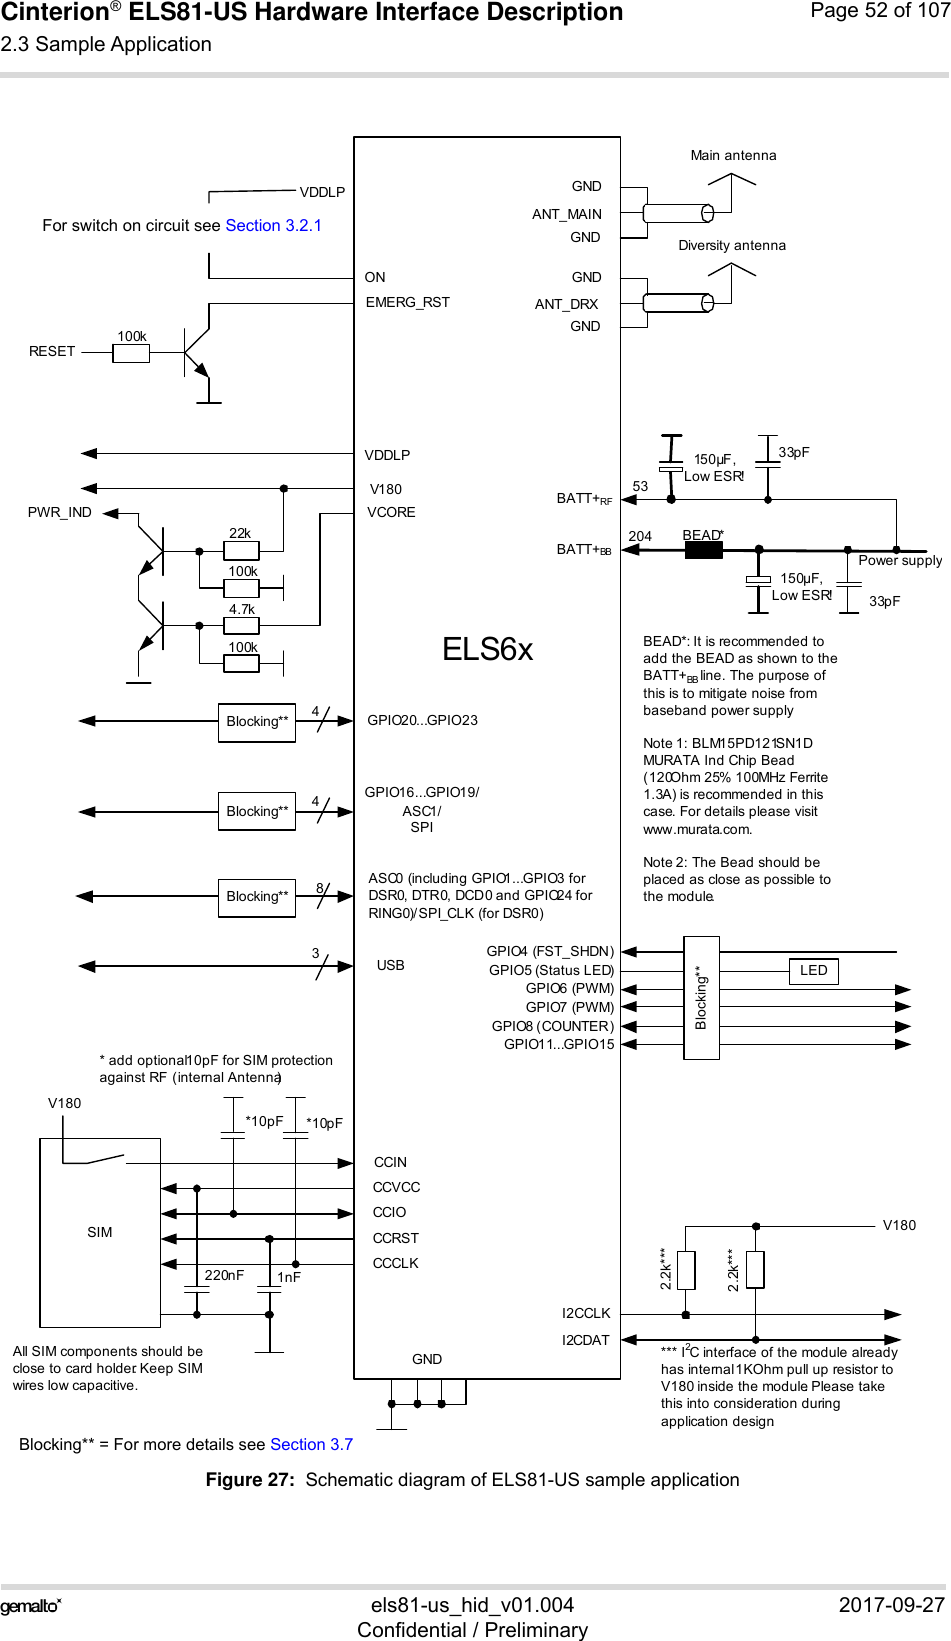 Cinterion® ELS81-US Hardware Interface Description2.3 Sample Application53els81-us_hid_v01.004 2017-09-27Confidential / PreliminaryPage 52 of 107Figure 27:  Schematic diagram of ELS81-US sample applicationVCOREV180ASC0 (including GPIO1...GPIO3 for DSR0, DTR0, DCD0 and GPIO24 for RING0)/ SPI_CLK (for DSR0)GPIO16...GPIO19/ASC1/SPI84CCVCCCCIOCCCLKCCINCCRSTSIMV180220nF 1nFI2CCLKI2CDAT2.2k***V180GPIO4 (FST_SHDN) GPIO5 (Status LED)GPIO6 (PWM)GPIO7 (PWM)GPIO8 (COUNTER)GPIO11...GPIO15LEDGNDGNDGNDANT_MAINBATT+RFPower supplyMain antennaELS6xAll SIM components should be close to card holder. Keep SIM wires low capacitive.*10pF *10pF* add optional 10pF for SIM protection against RF  (internal Antenna)150µF,Low ESR! 33pFBlocking**Blocking**Blocking**PWR_INDBATT+BB53204GPIO20...GPIO234Blocking**100k4.7k100k22k2.2k***3USB150µF,Low ESR!33pFGNDGNDANT_DRXDiversity antennaONEMERG_RSTRESETVDDLP100kVDDLPBEAD*BEAD*: It is  recommended to add the BEAD as shown to the BATT+BB line. The purpose of this is to mitigate noise from baseband power supply. Note 1: BLM15PD121SN1D MURATA Ind Chip Bead (120Ohm 25% 100MHz Ferrite 1.3A) is recommended in this case. For details please visit www.murata.com.Note 2: The Bead should be placed as close as possible to the module. *** I2C interface of the module already has internal 1KOhm pull up resistor to V180 inside the module. Please take this into consideration during application design. Blocking** = For more details see Section 3.7For switch on circuit see Section 3.2.1